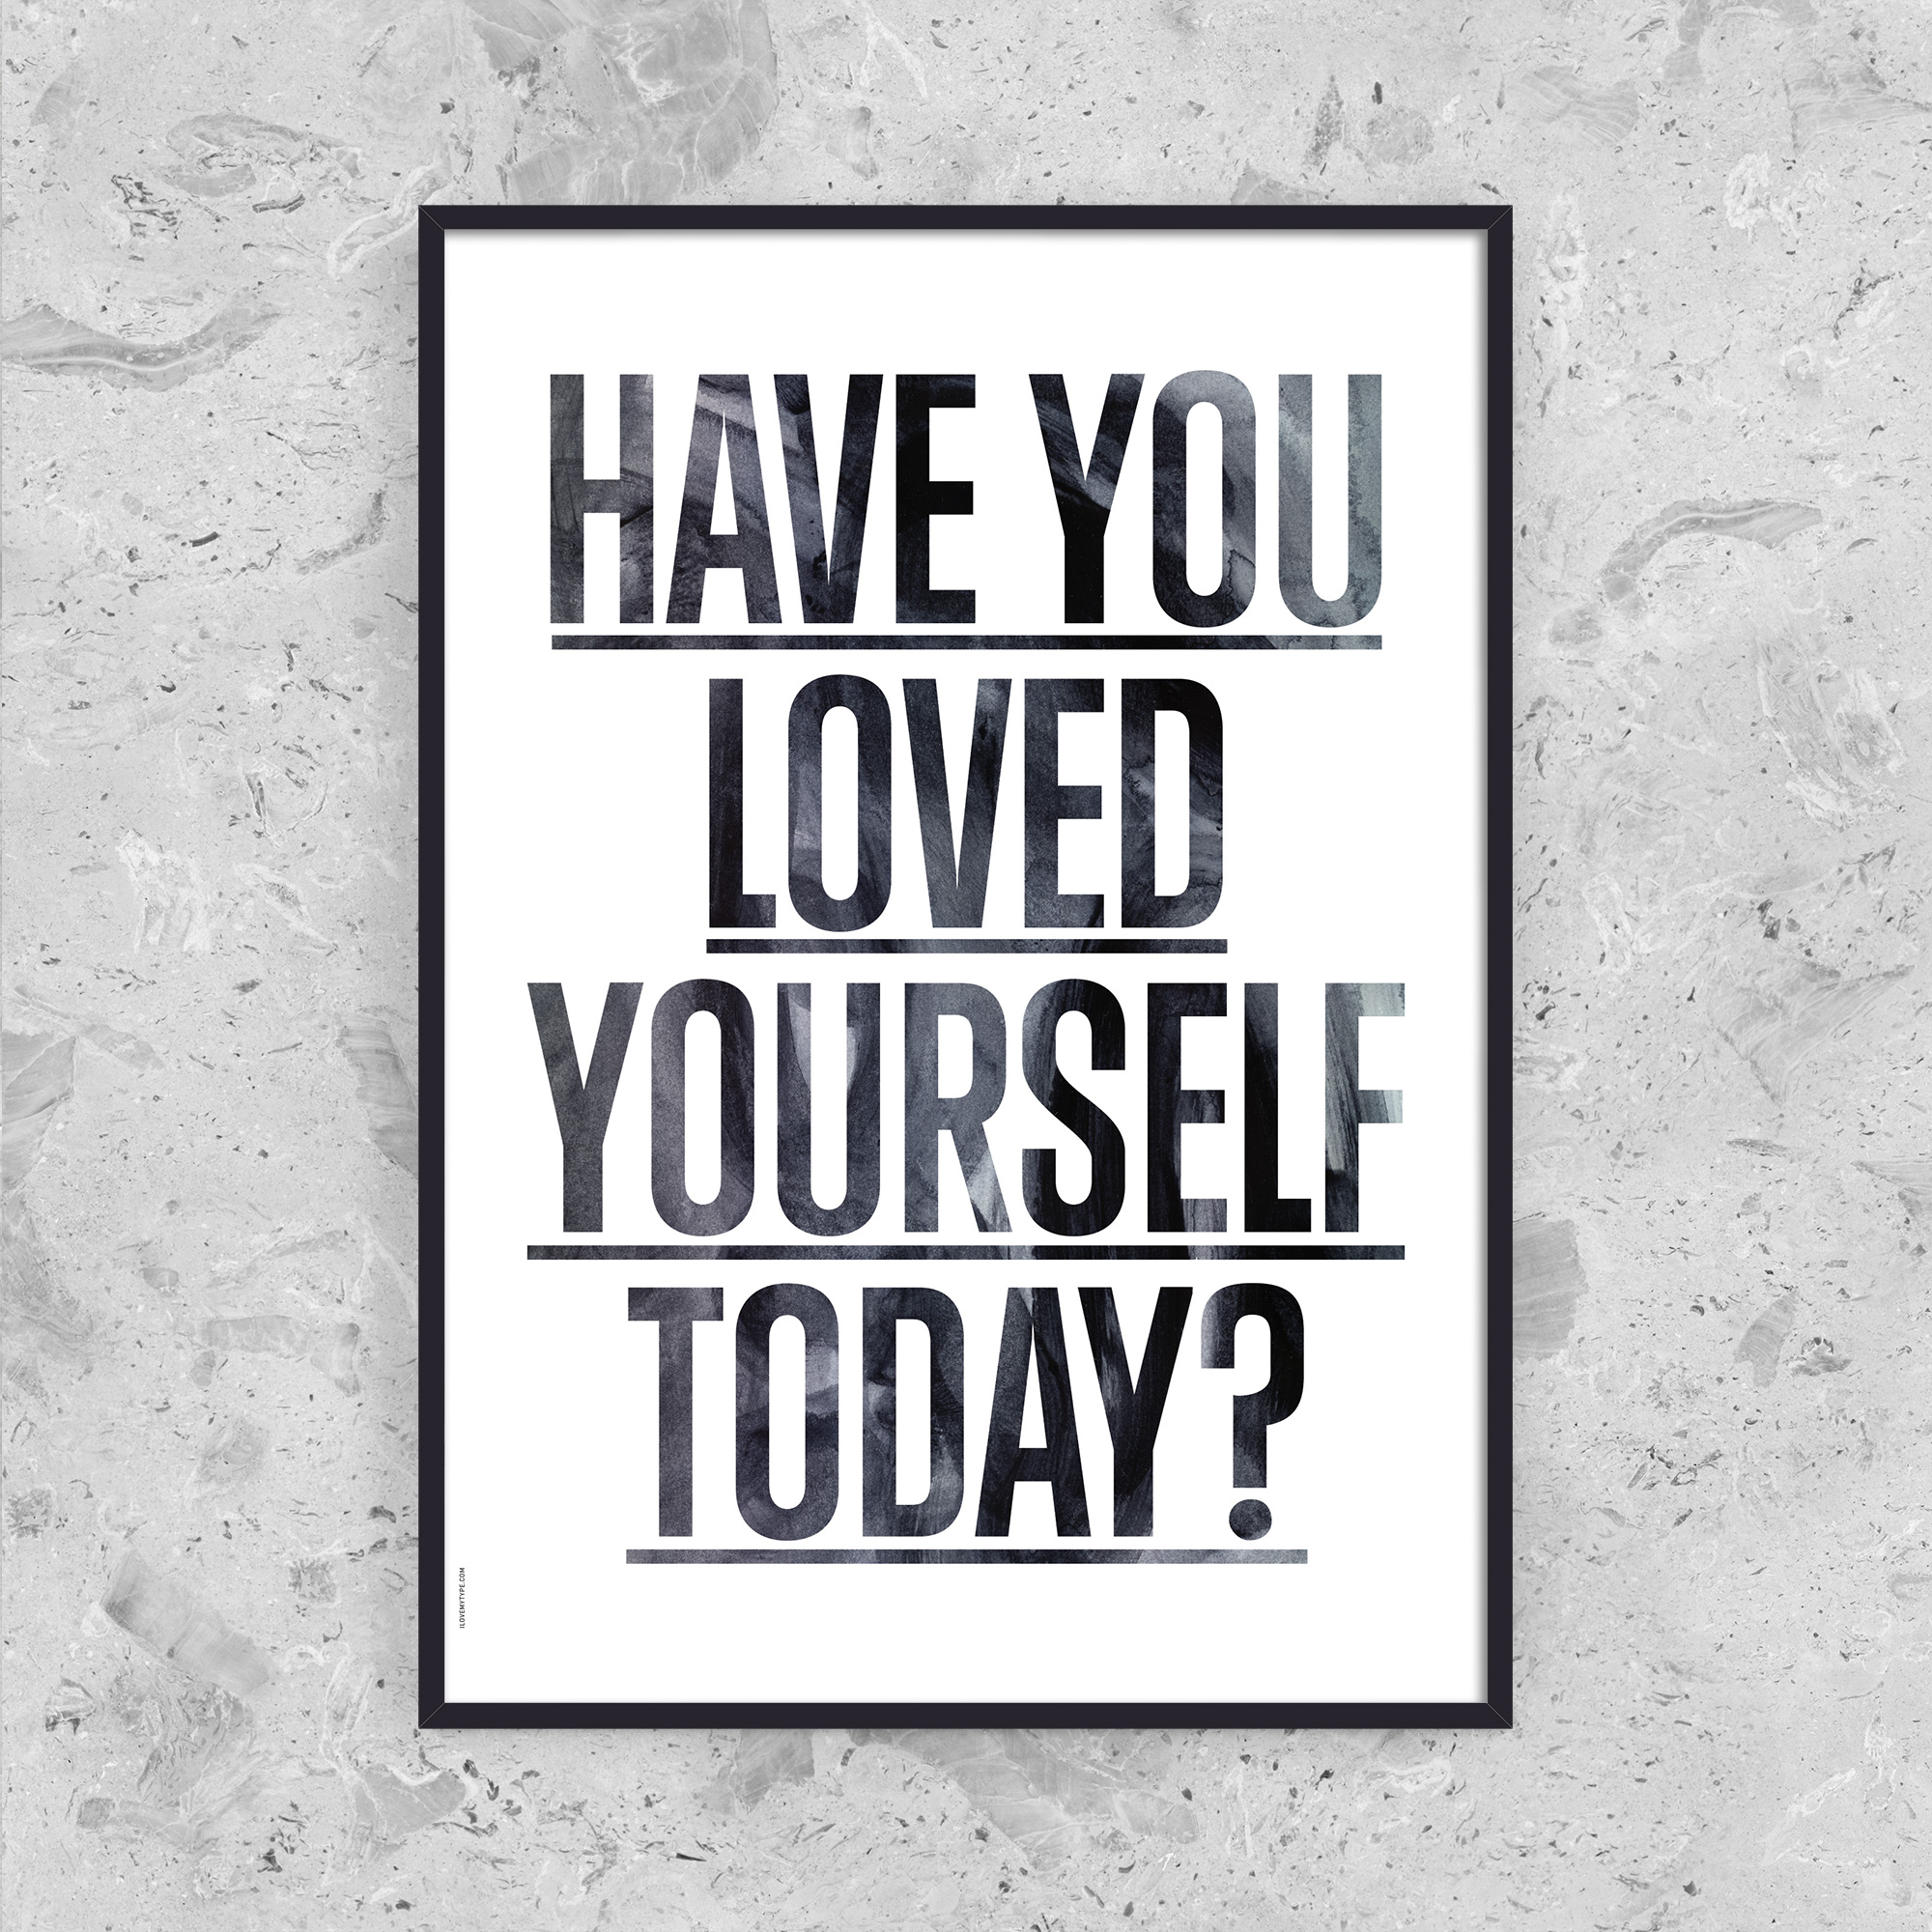 LOVED YOURSELF? - WHITE